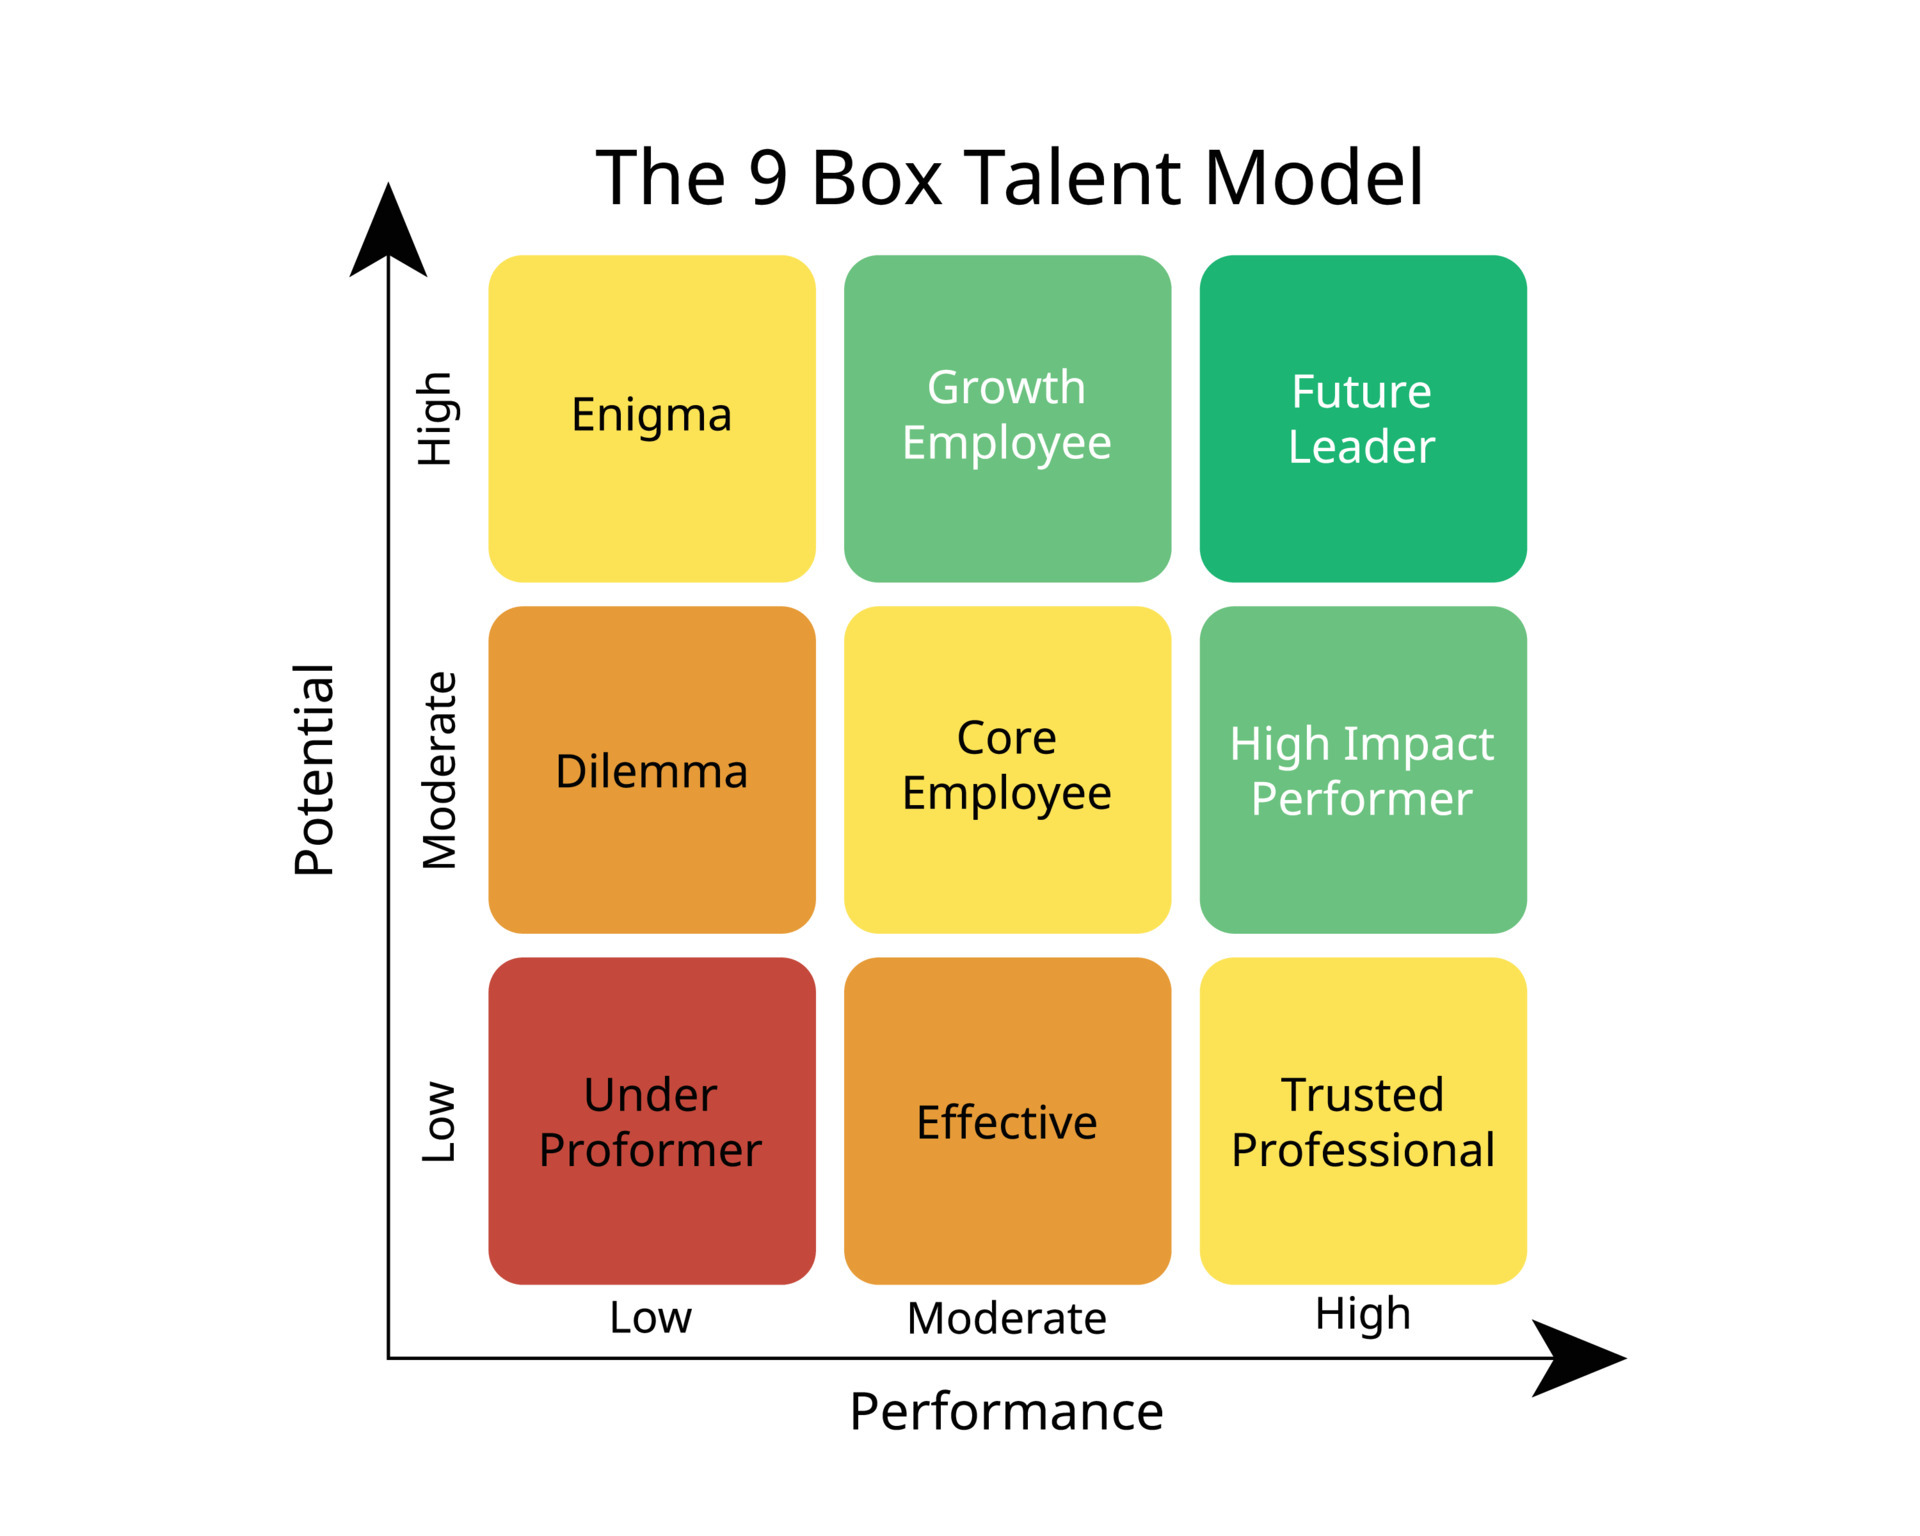 the-9-box-talent-model-or-the-9-box-grid-is-a-tool-used-to-analyze